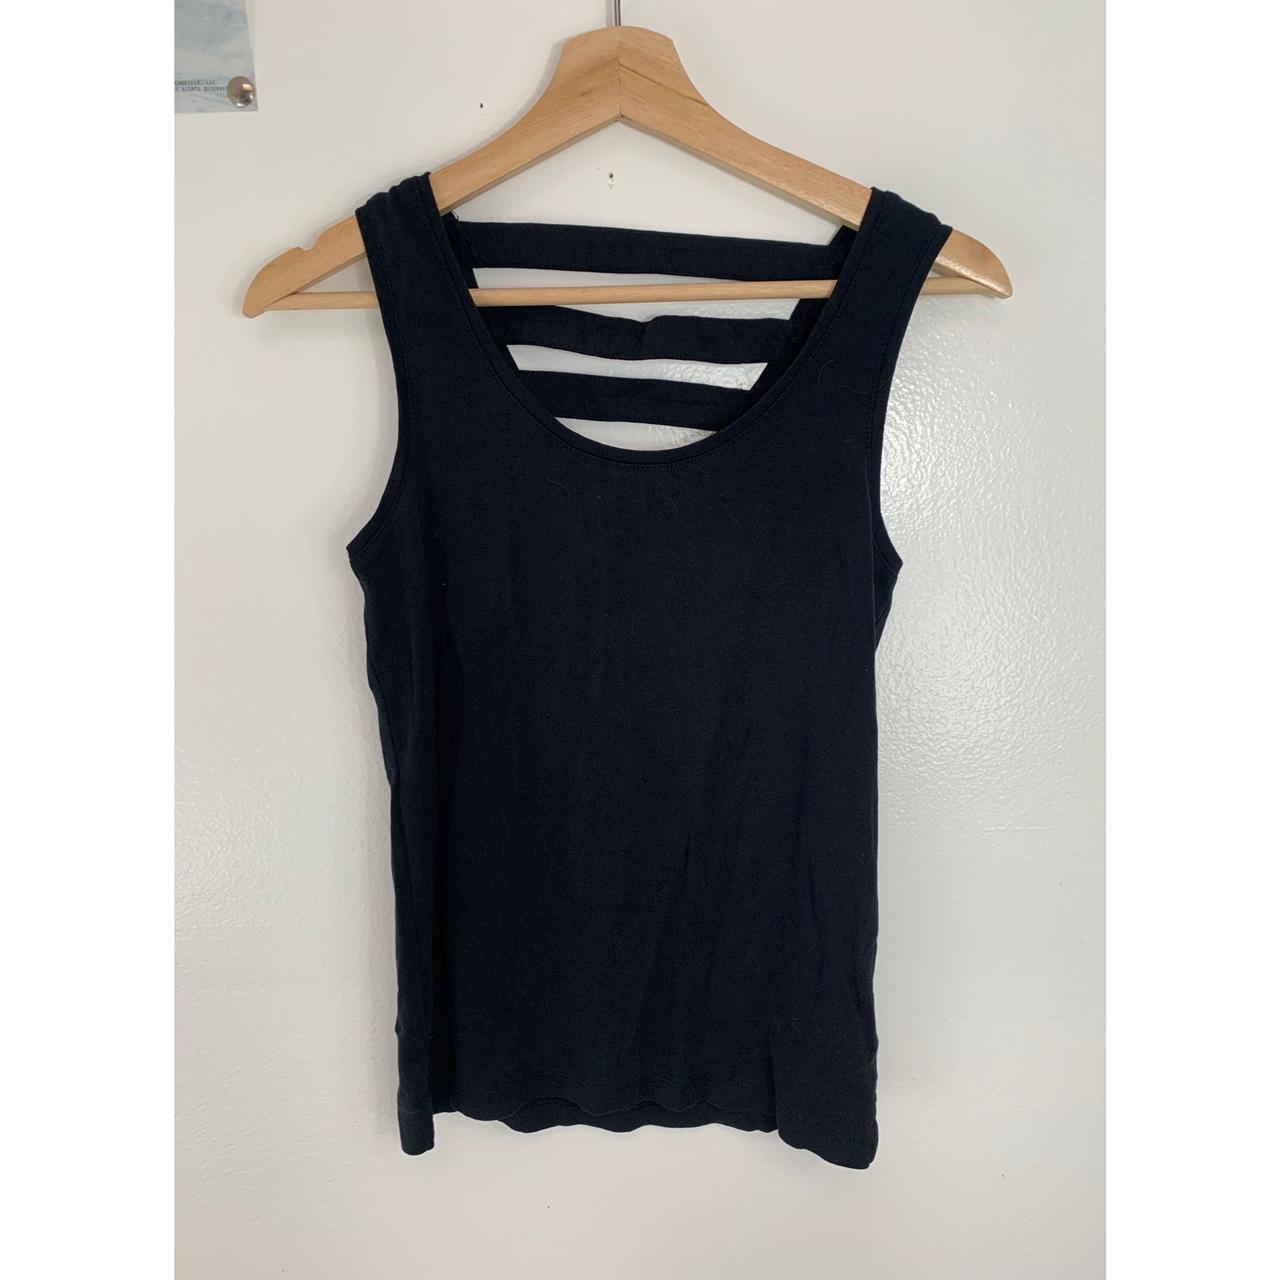 Product Image 1 - Black tank with striped open